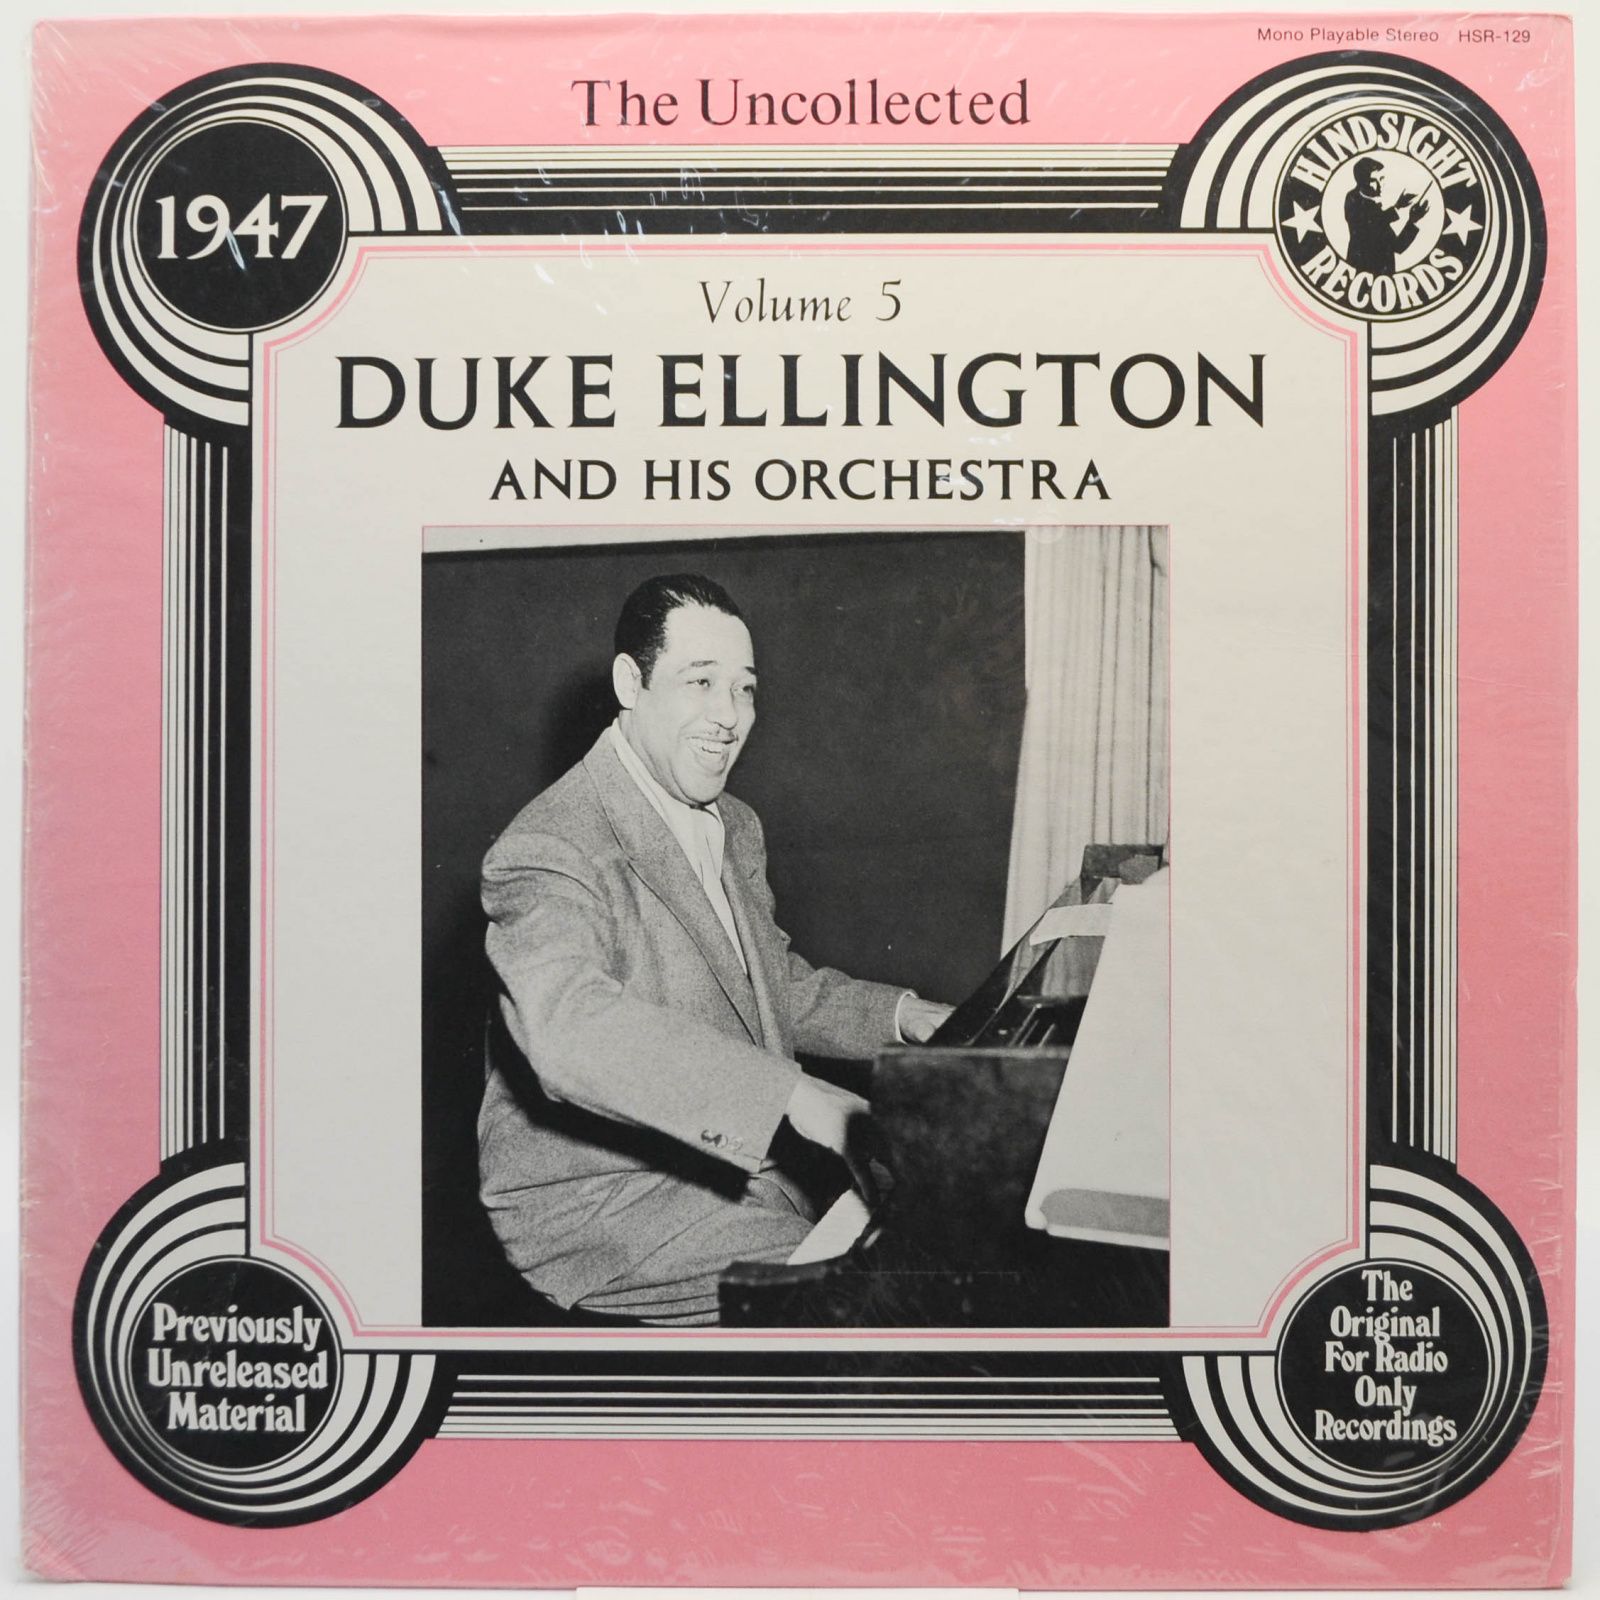 The Uncollected Duke Ellington And His Orchestra Volume 5 - 1947, 1978